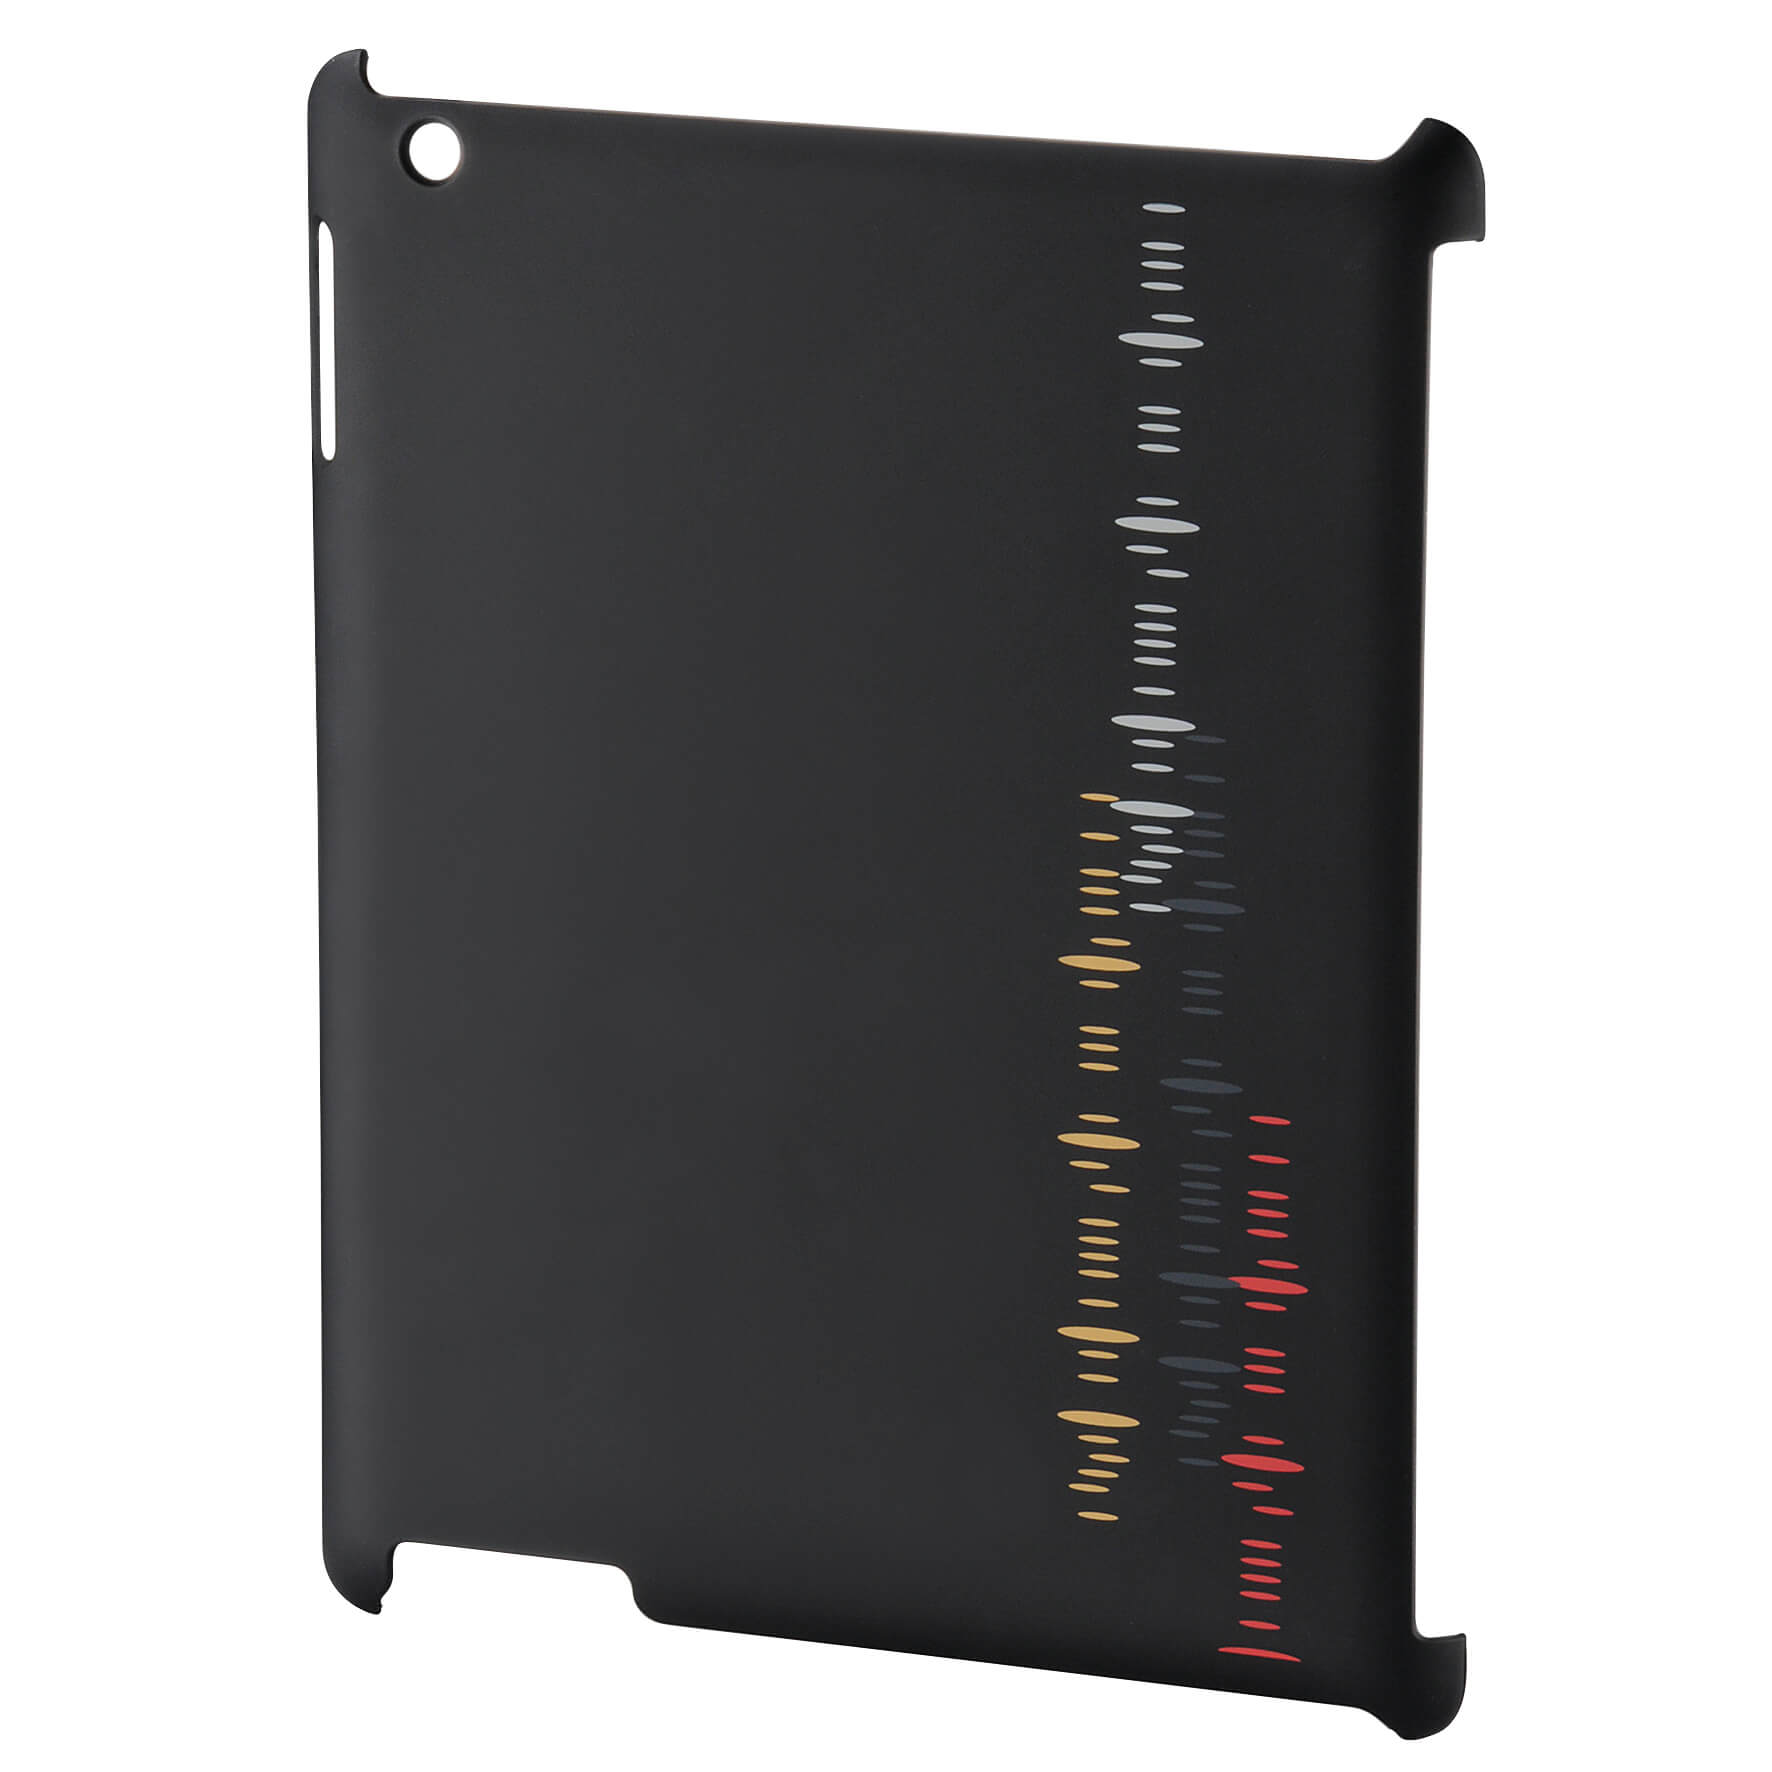 Graphic Cover for iPad 2, bla ck